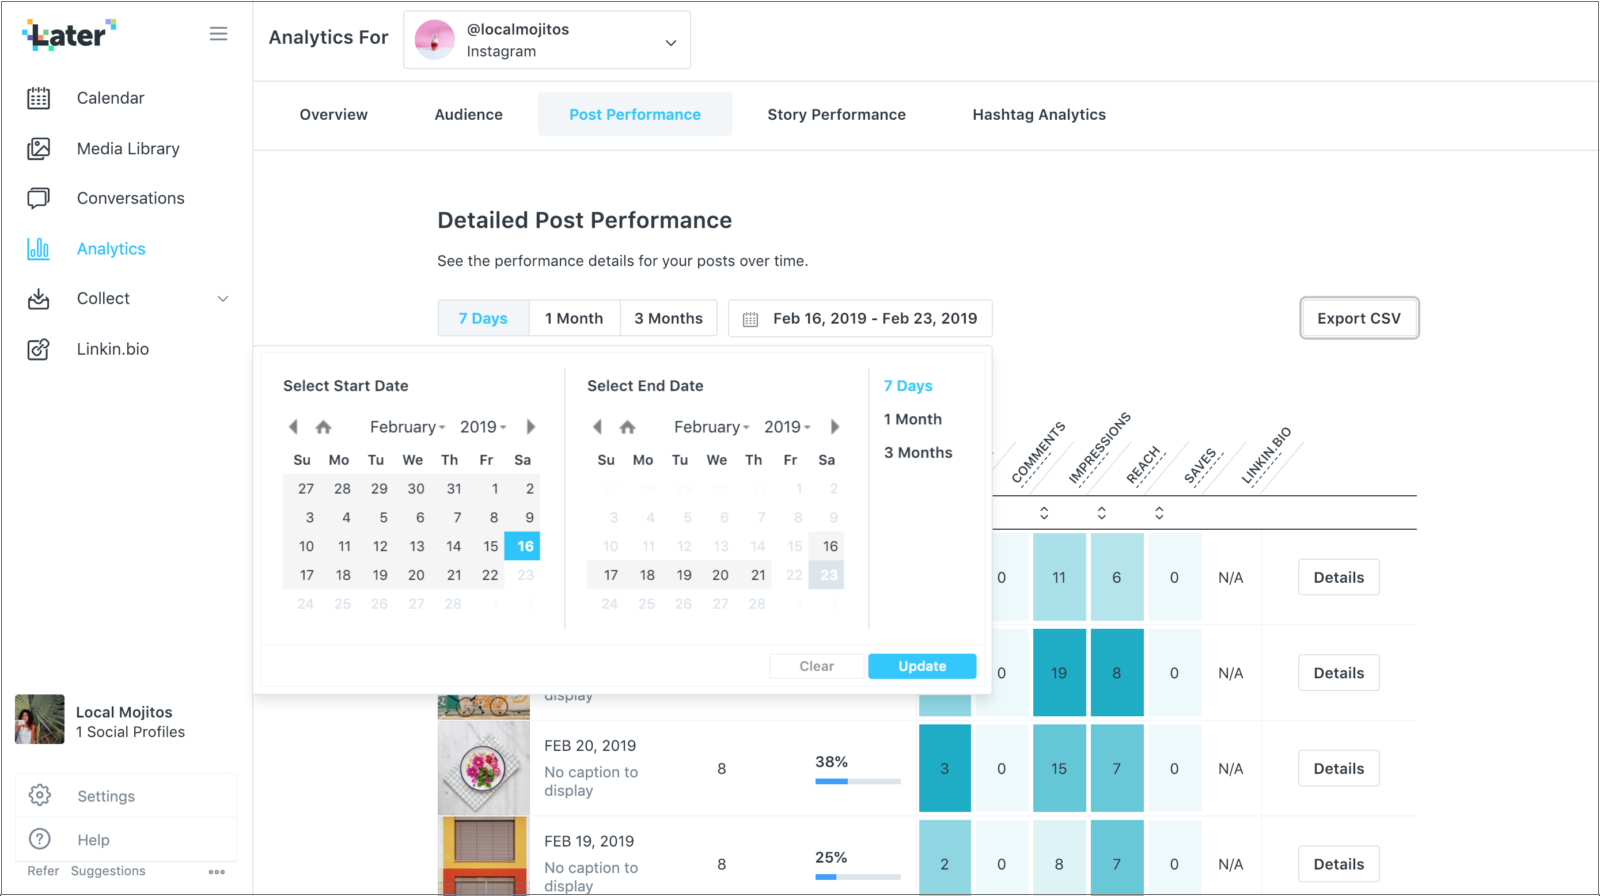 How To Build A Monthly Social Media Report Within Free Social Media Report Template